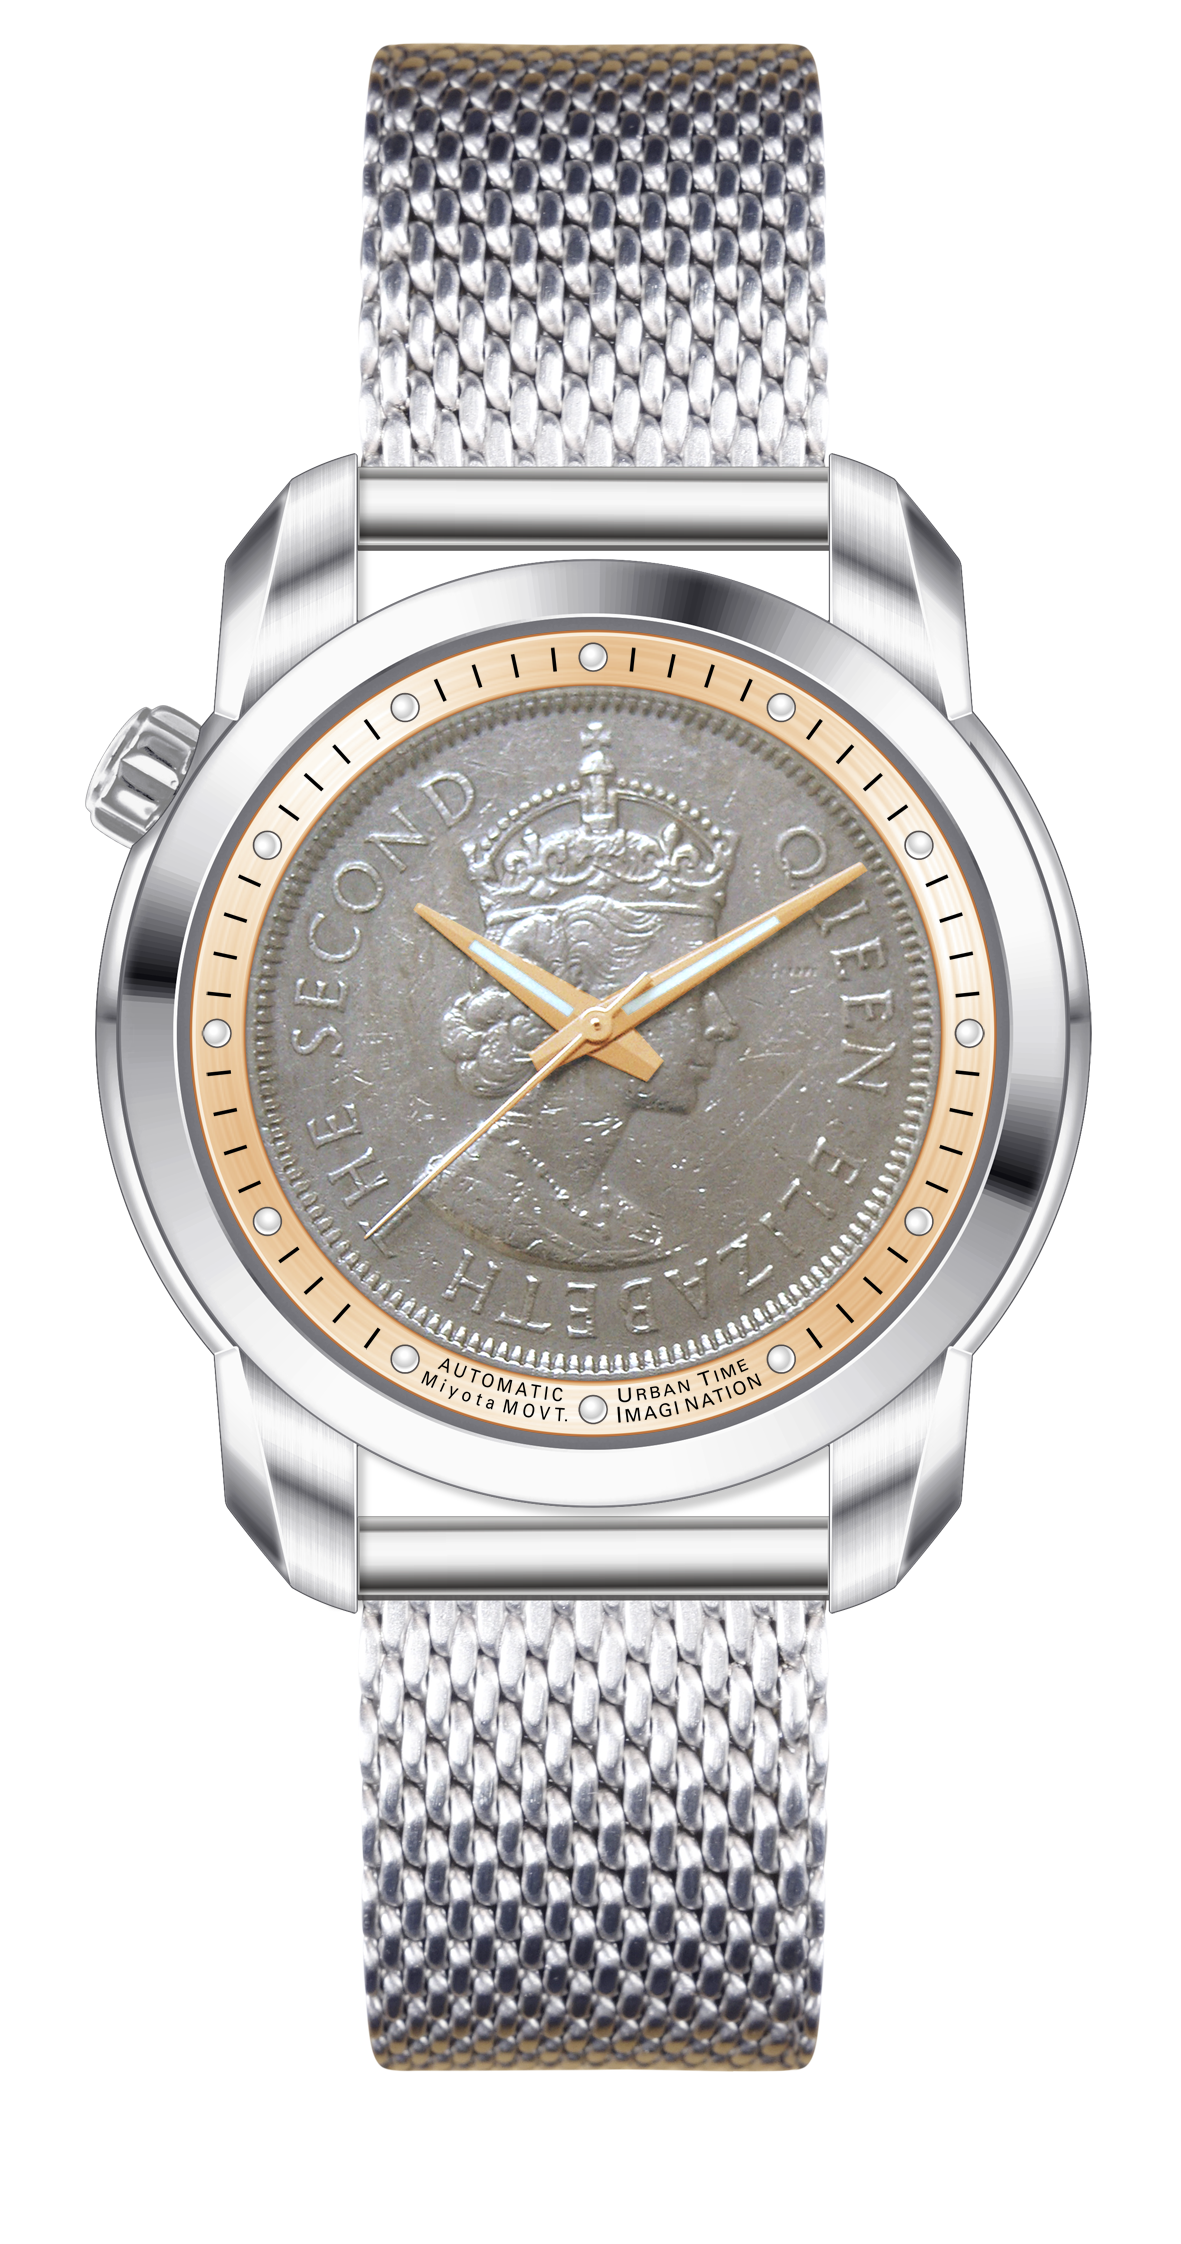 THE COIN AUTOMATICS ROSE GOLD - Urban Time Imagination